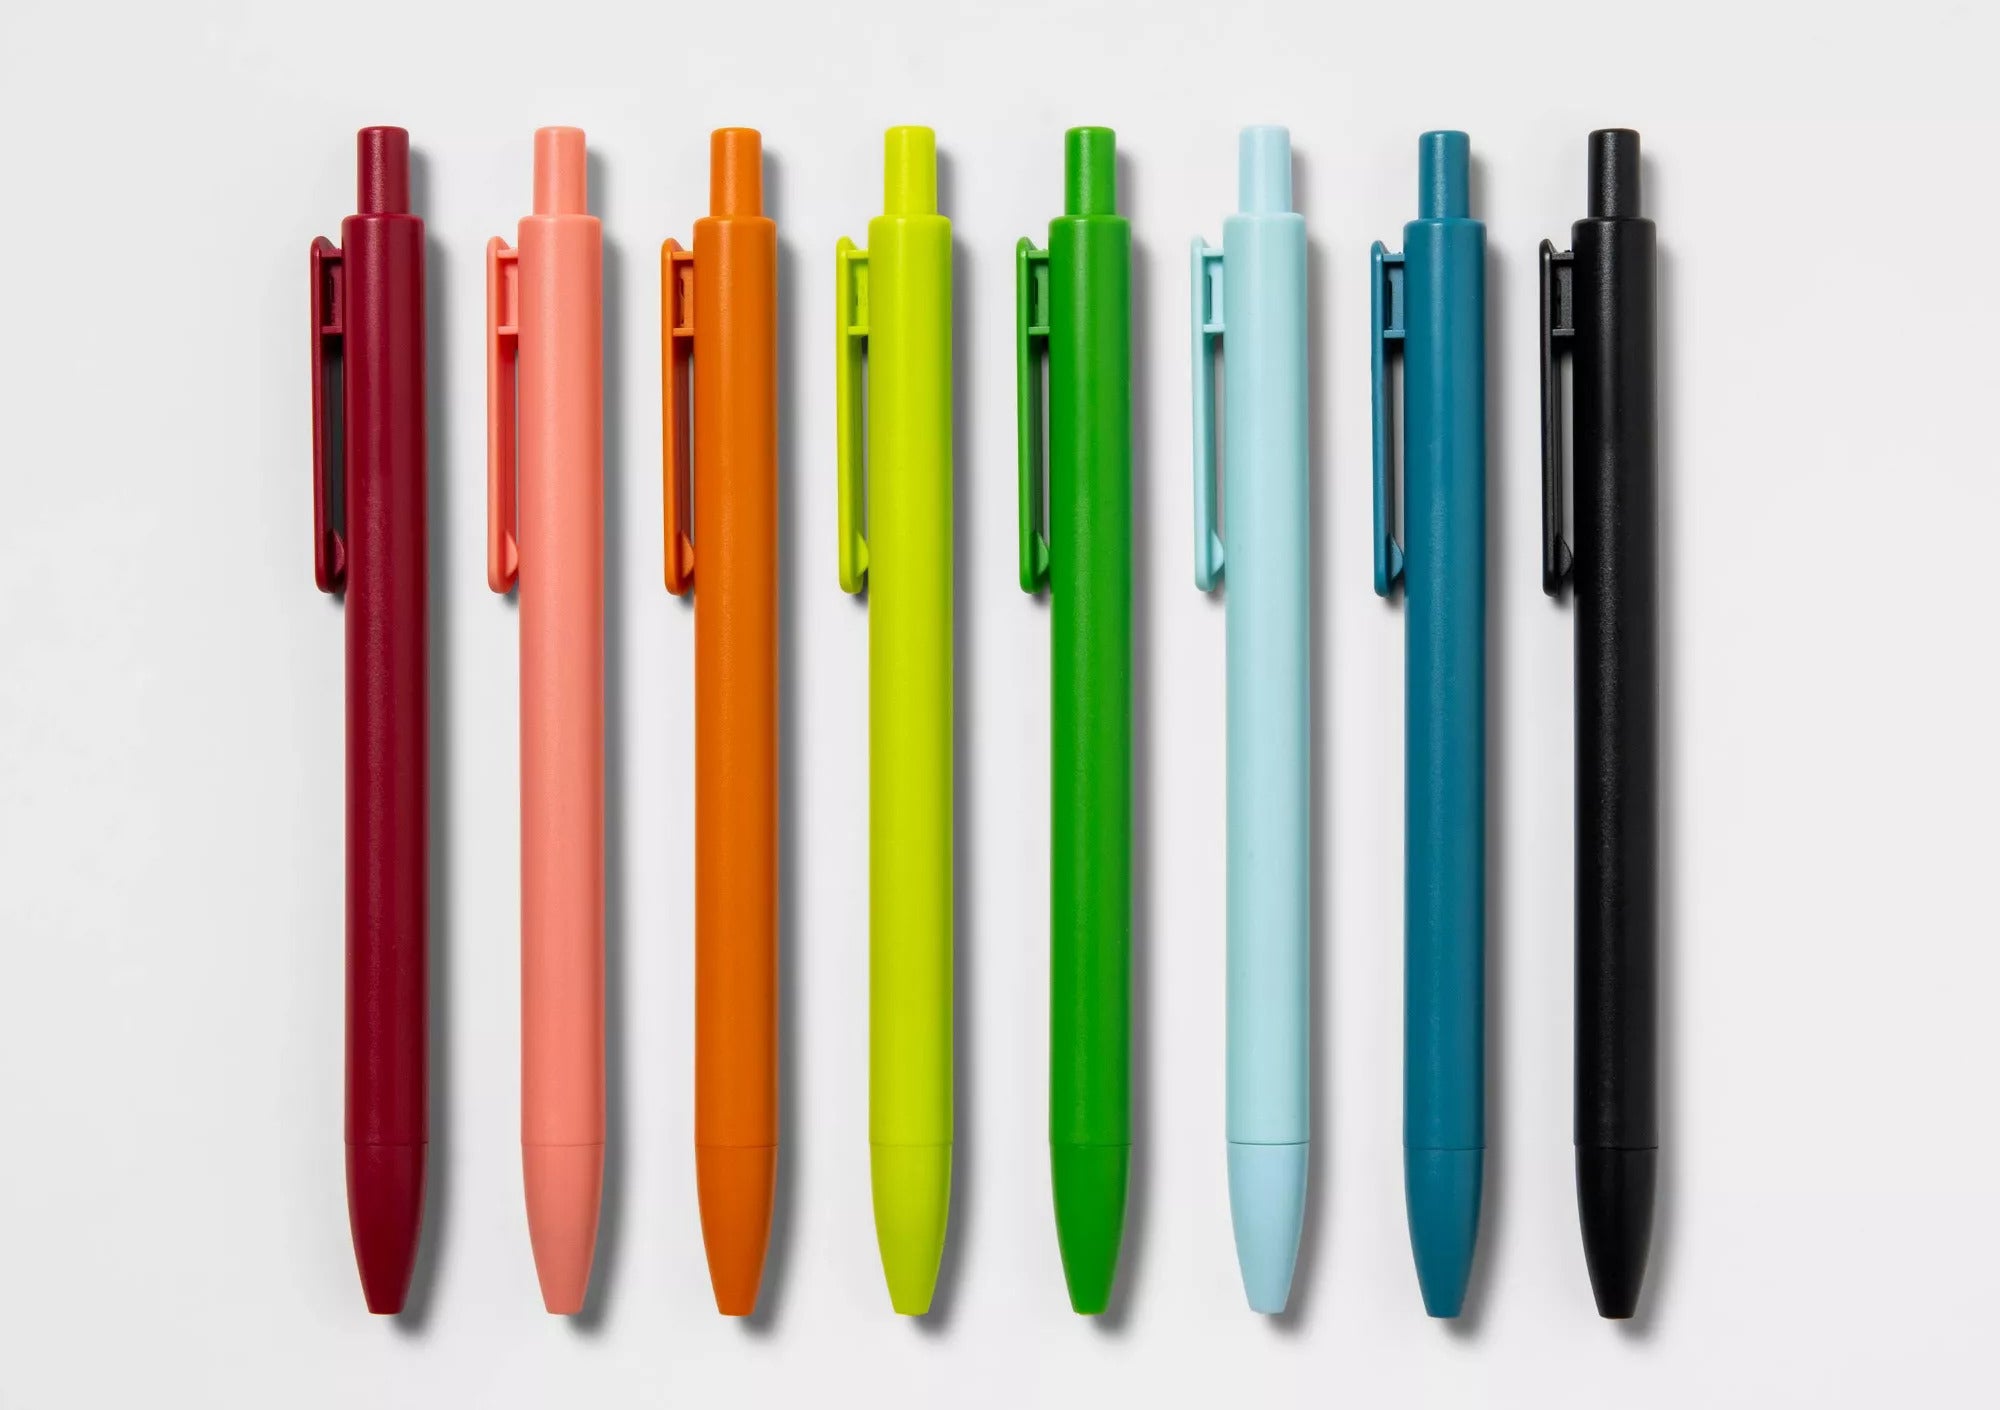 The eight gel pens, each featuring a different color